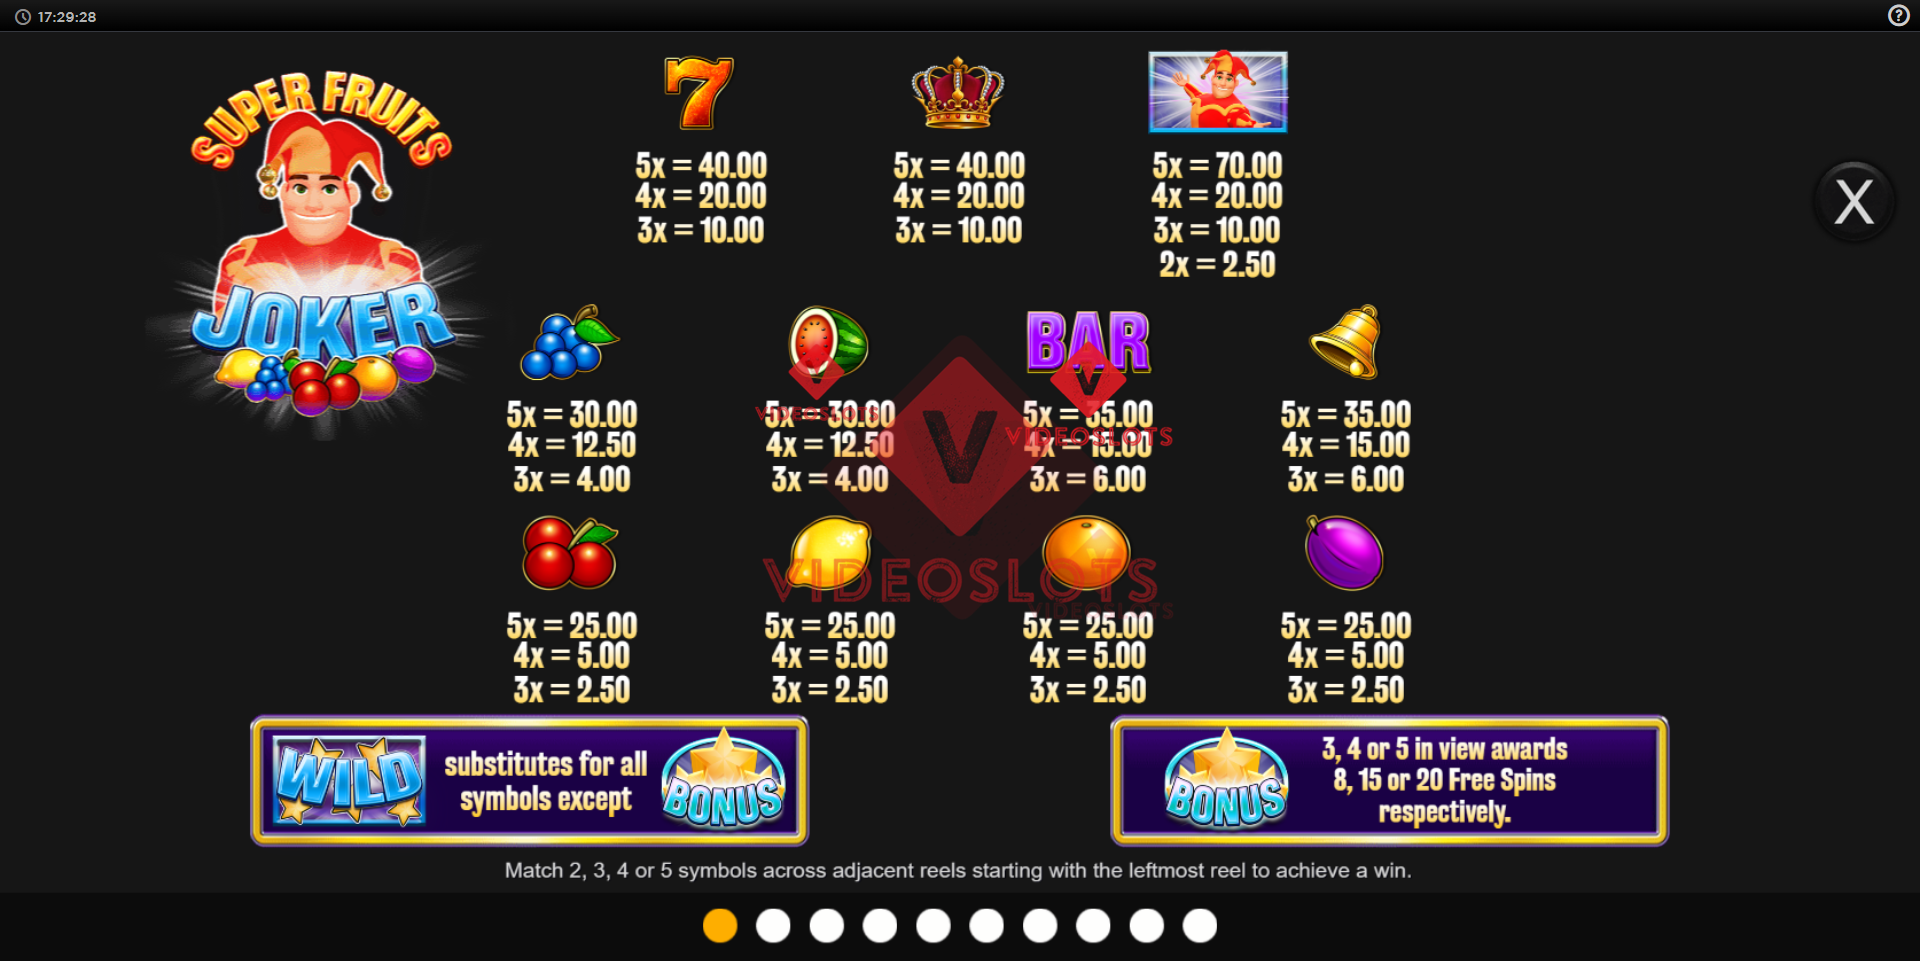 Pay Table for Super Fruits Joker slot from Inspired Gaming